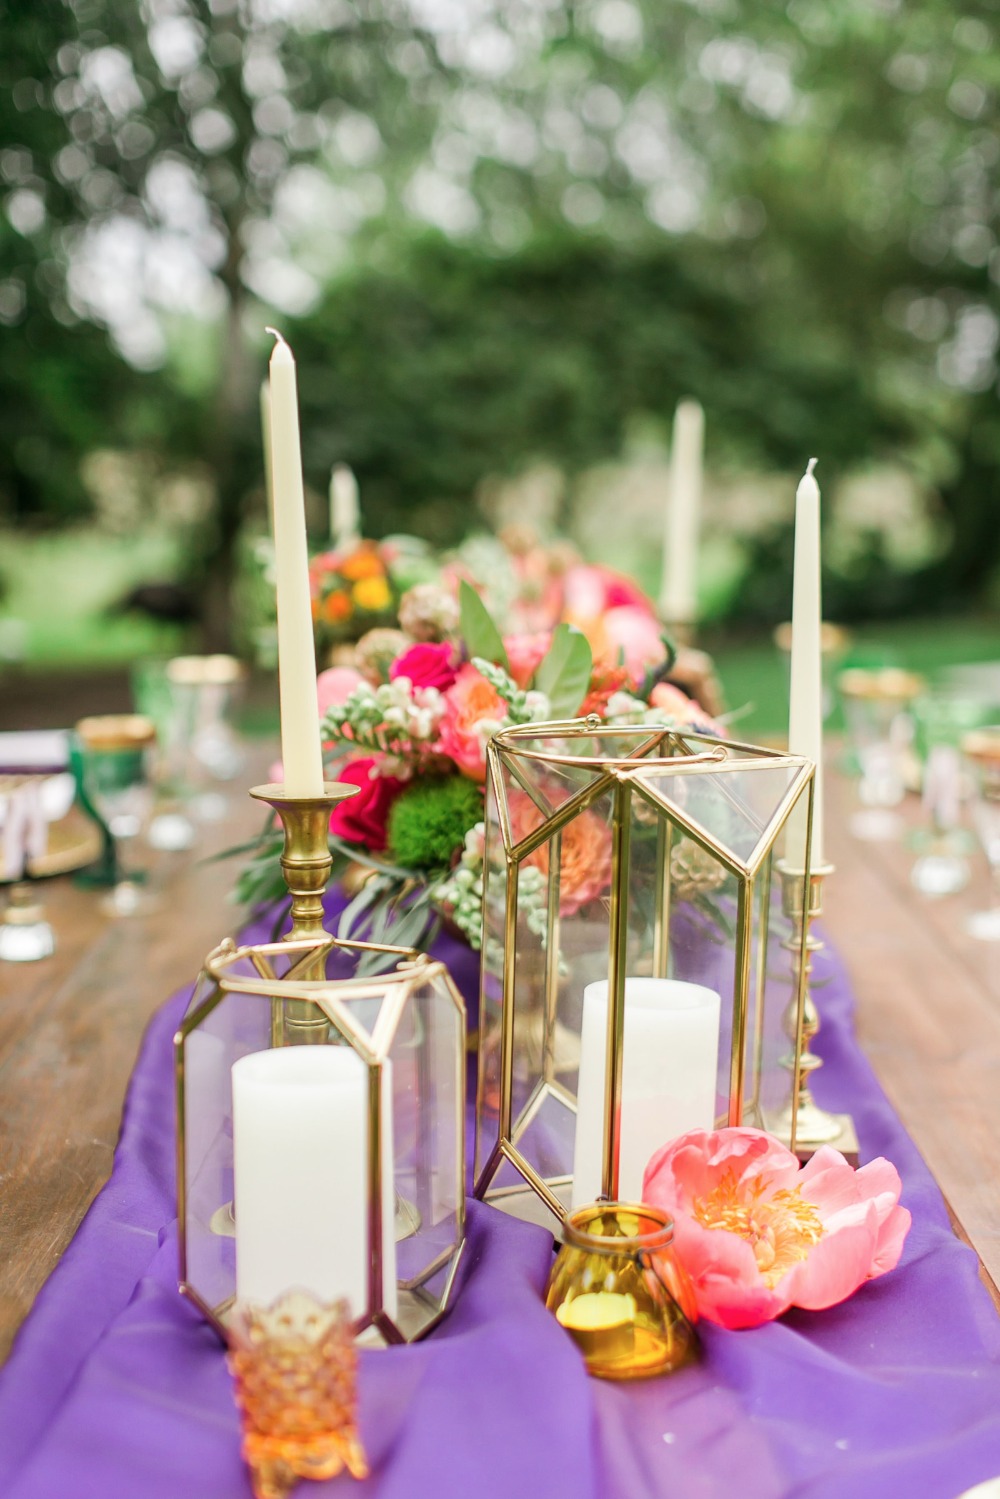 Candle centerpiece and purple table runner